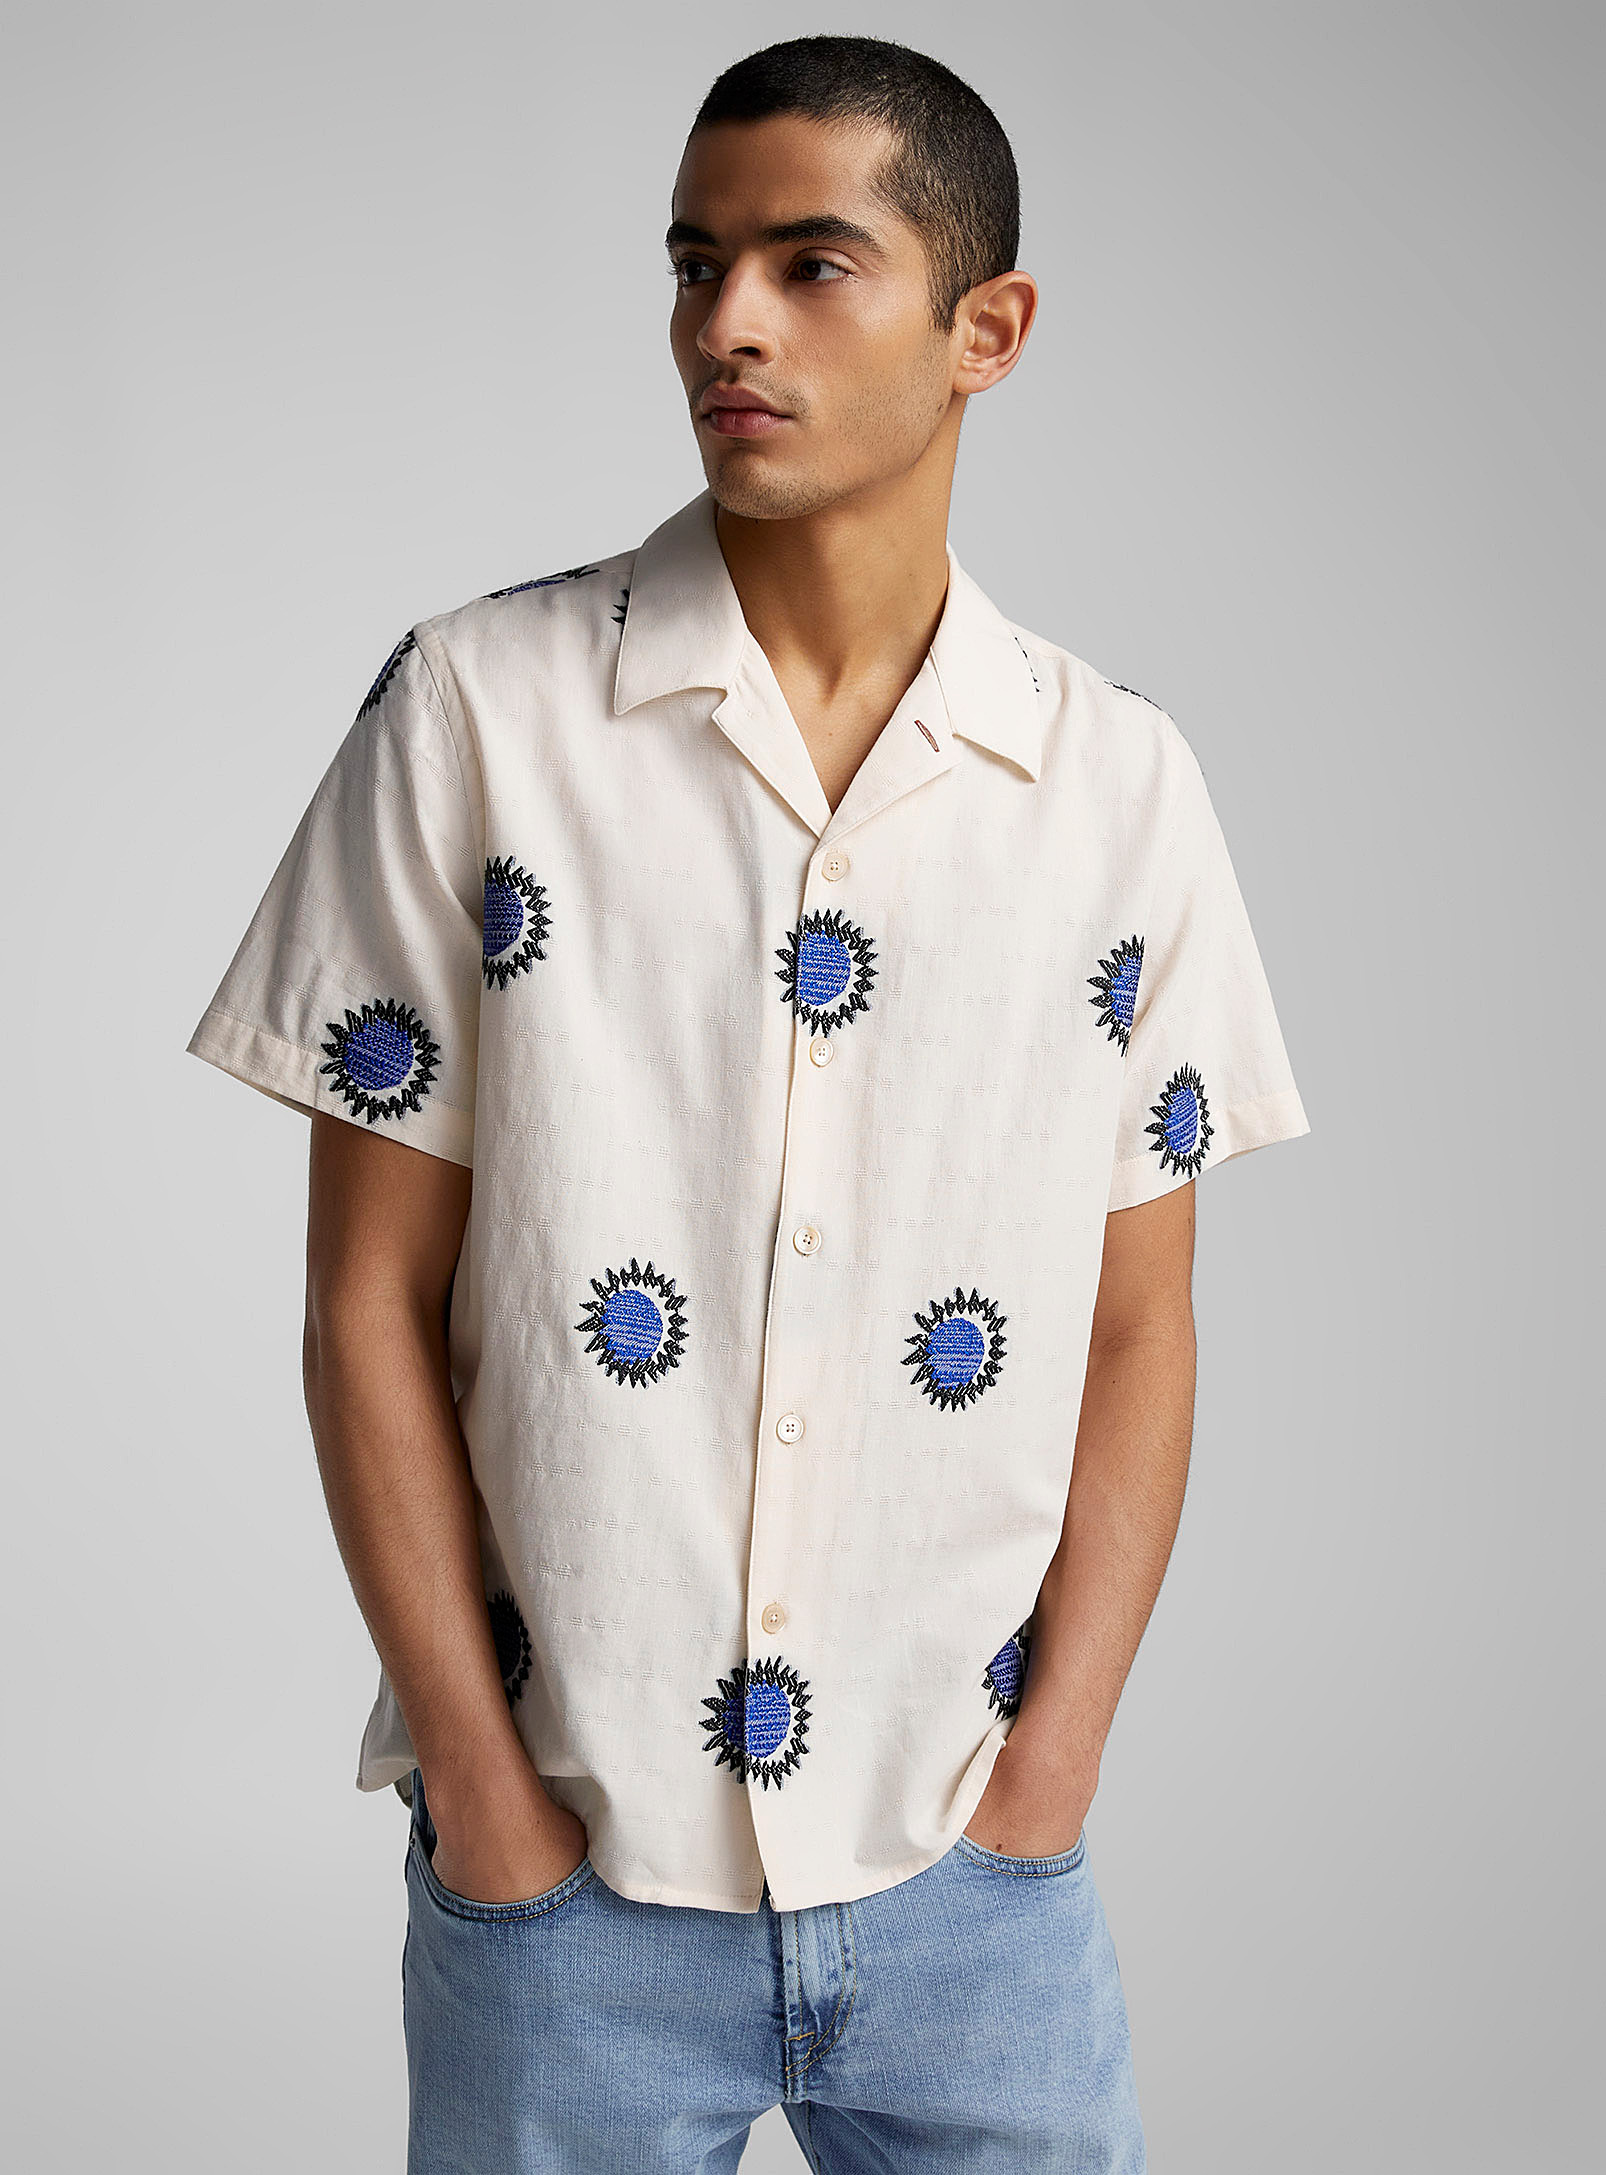 Ps By Paul Smith Embroidered Suns Shirt In Ivory White